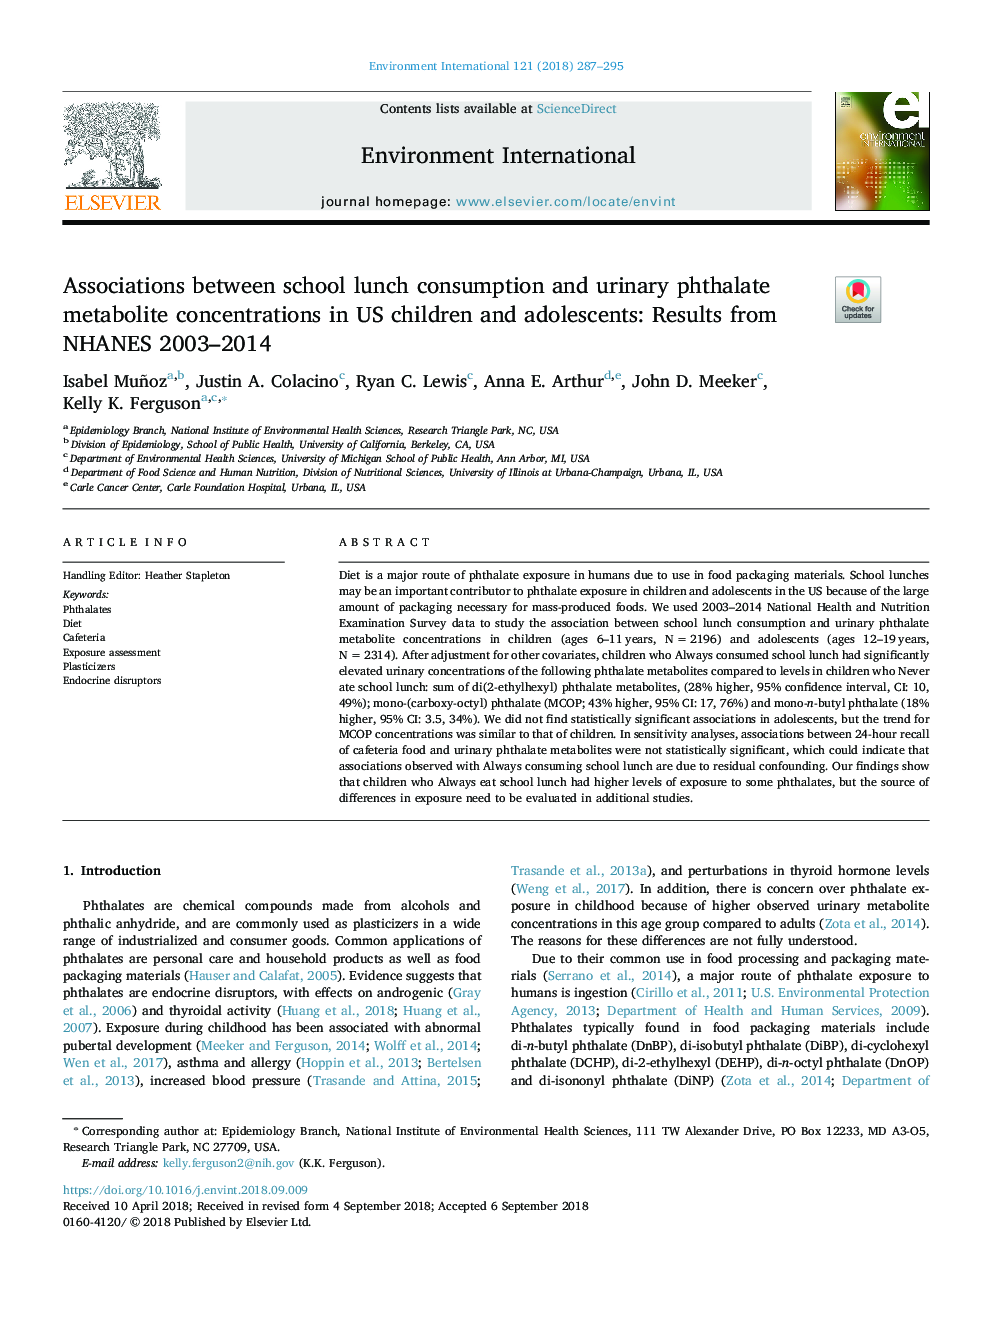 Associations between school lunch consumption and urinary phthalate metabolite concentrations in US children and adolescents: Results from NHANES 2003-2014